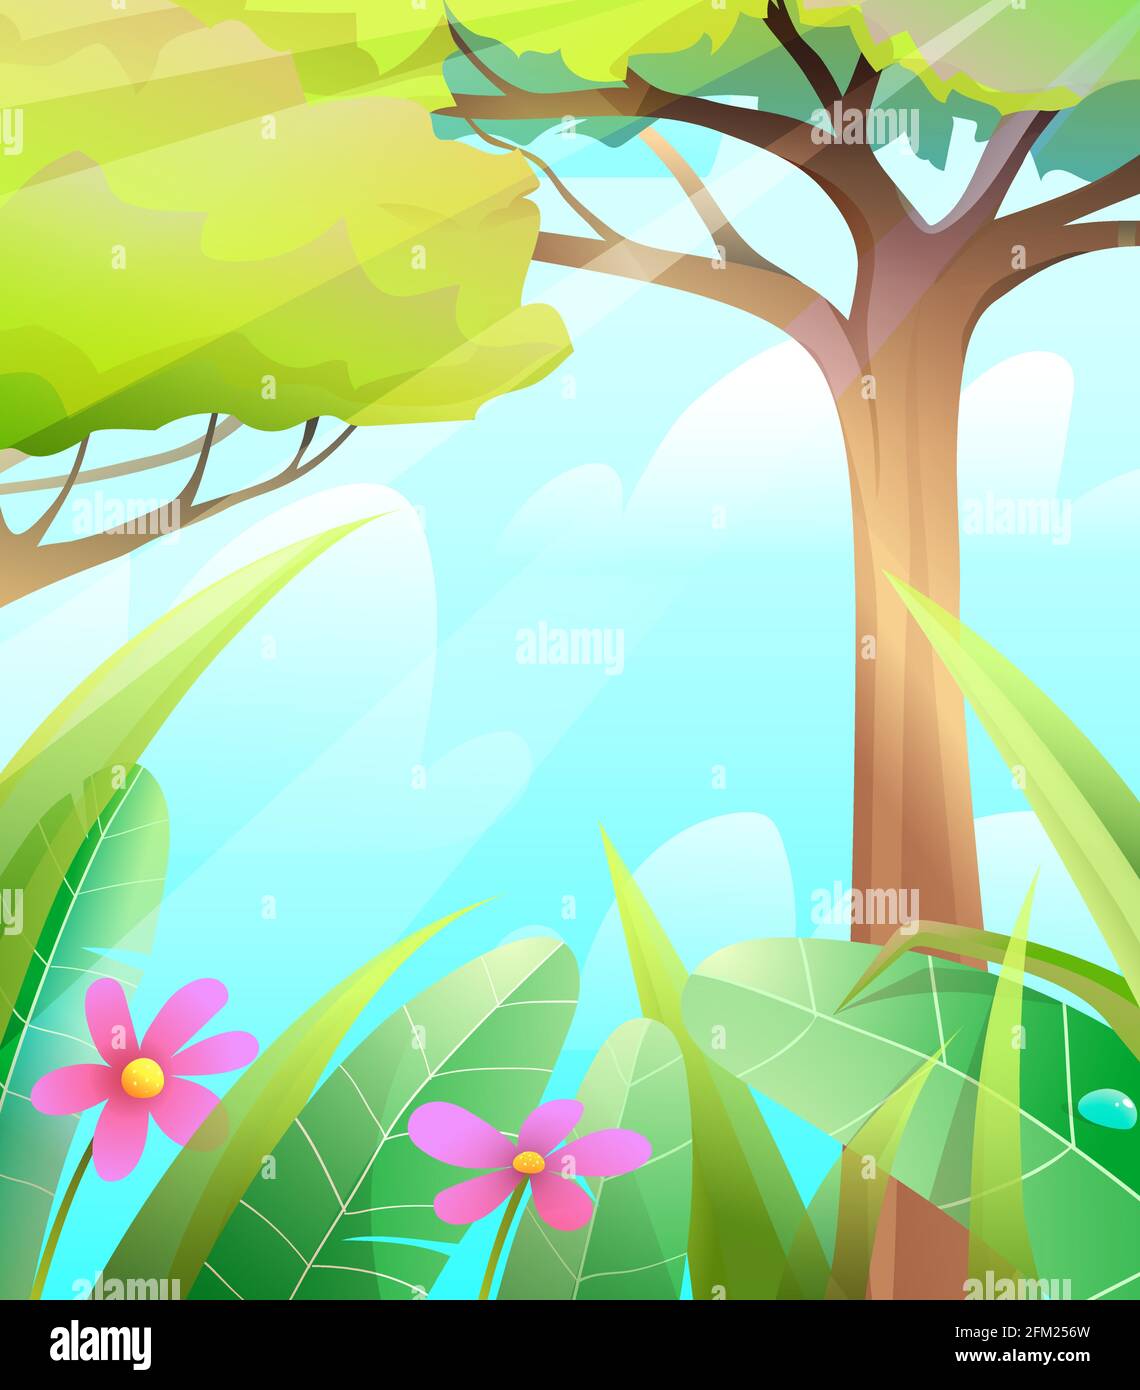 Wild Forest Nature Summer Scenery Background Stock Vector